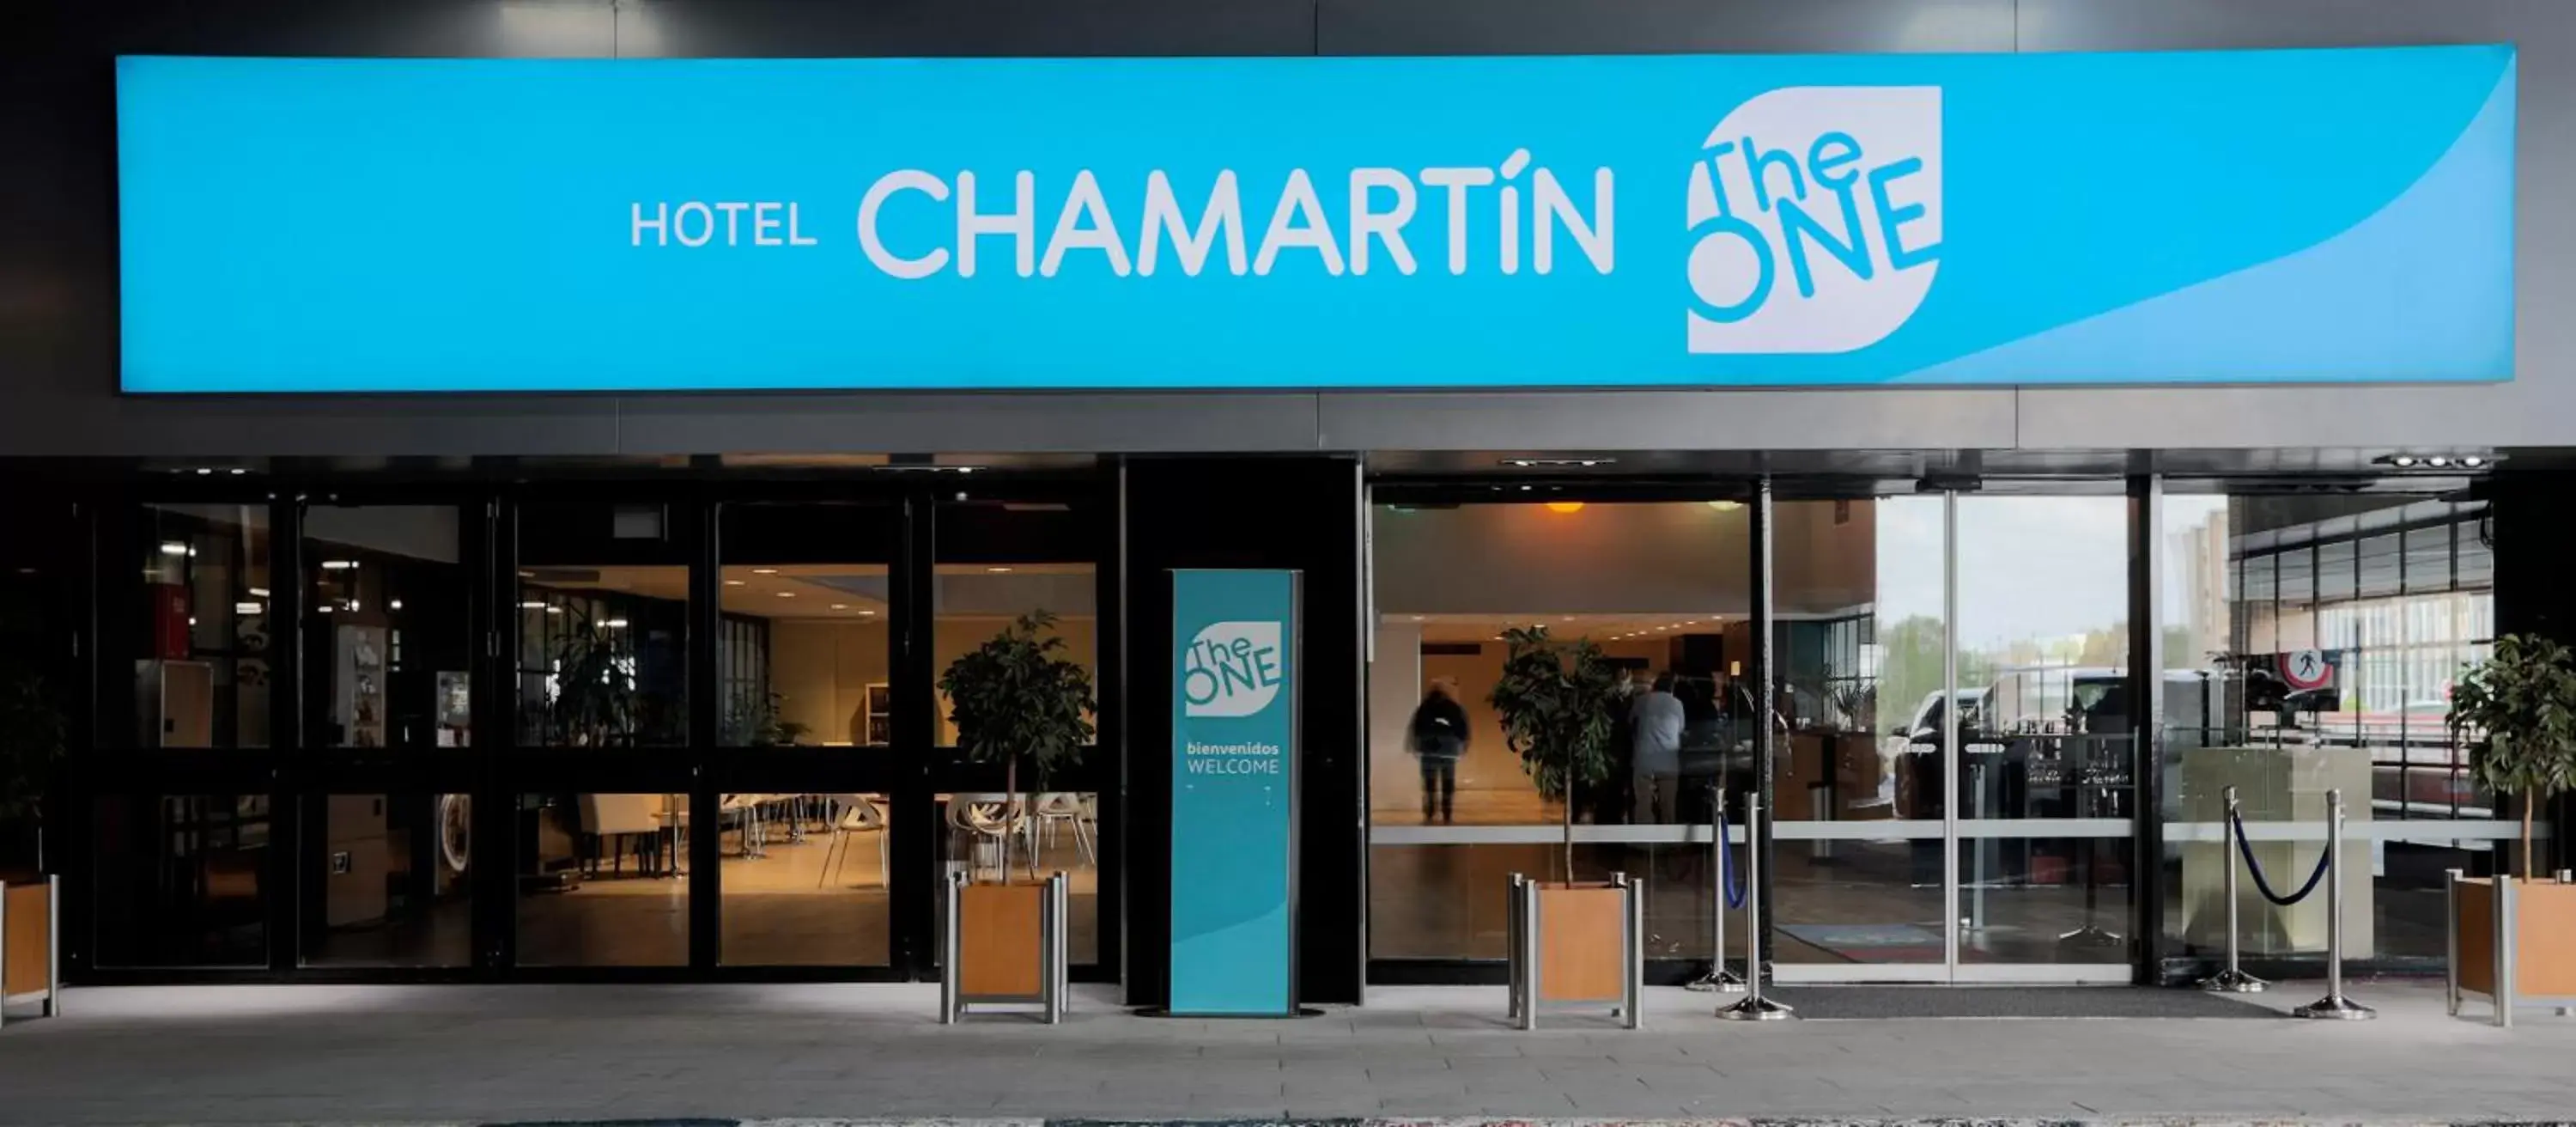 Property building in Hotel Chamartin The One